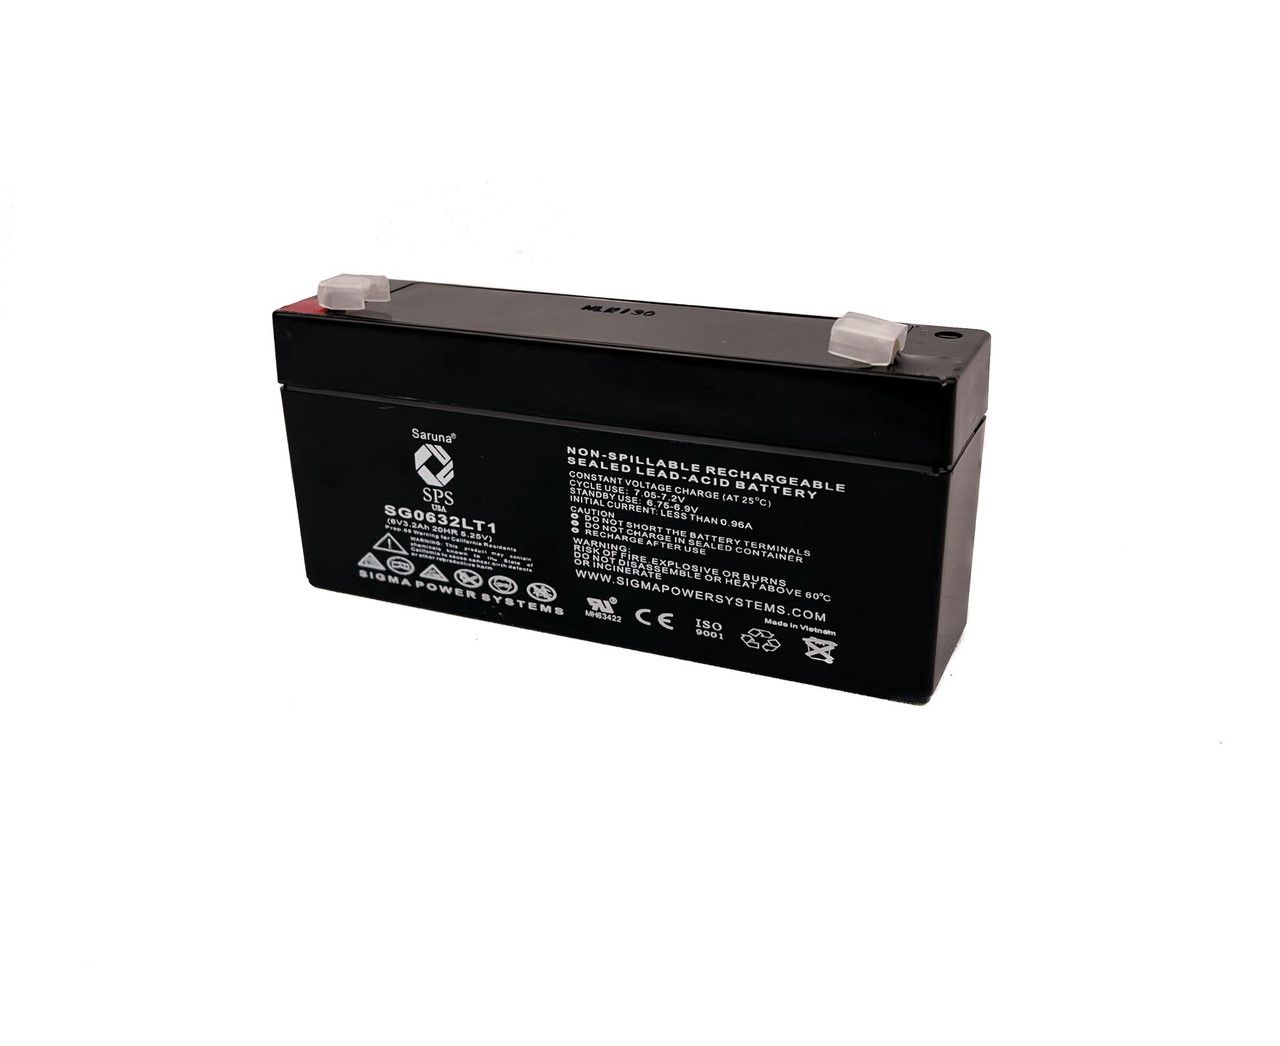 Raion Power 6V 3.2Ah Non-Spillable Replacement Rechargebale Battery for Alaris Medical PC4 GeMini